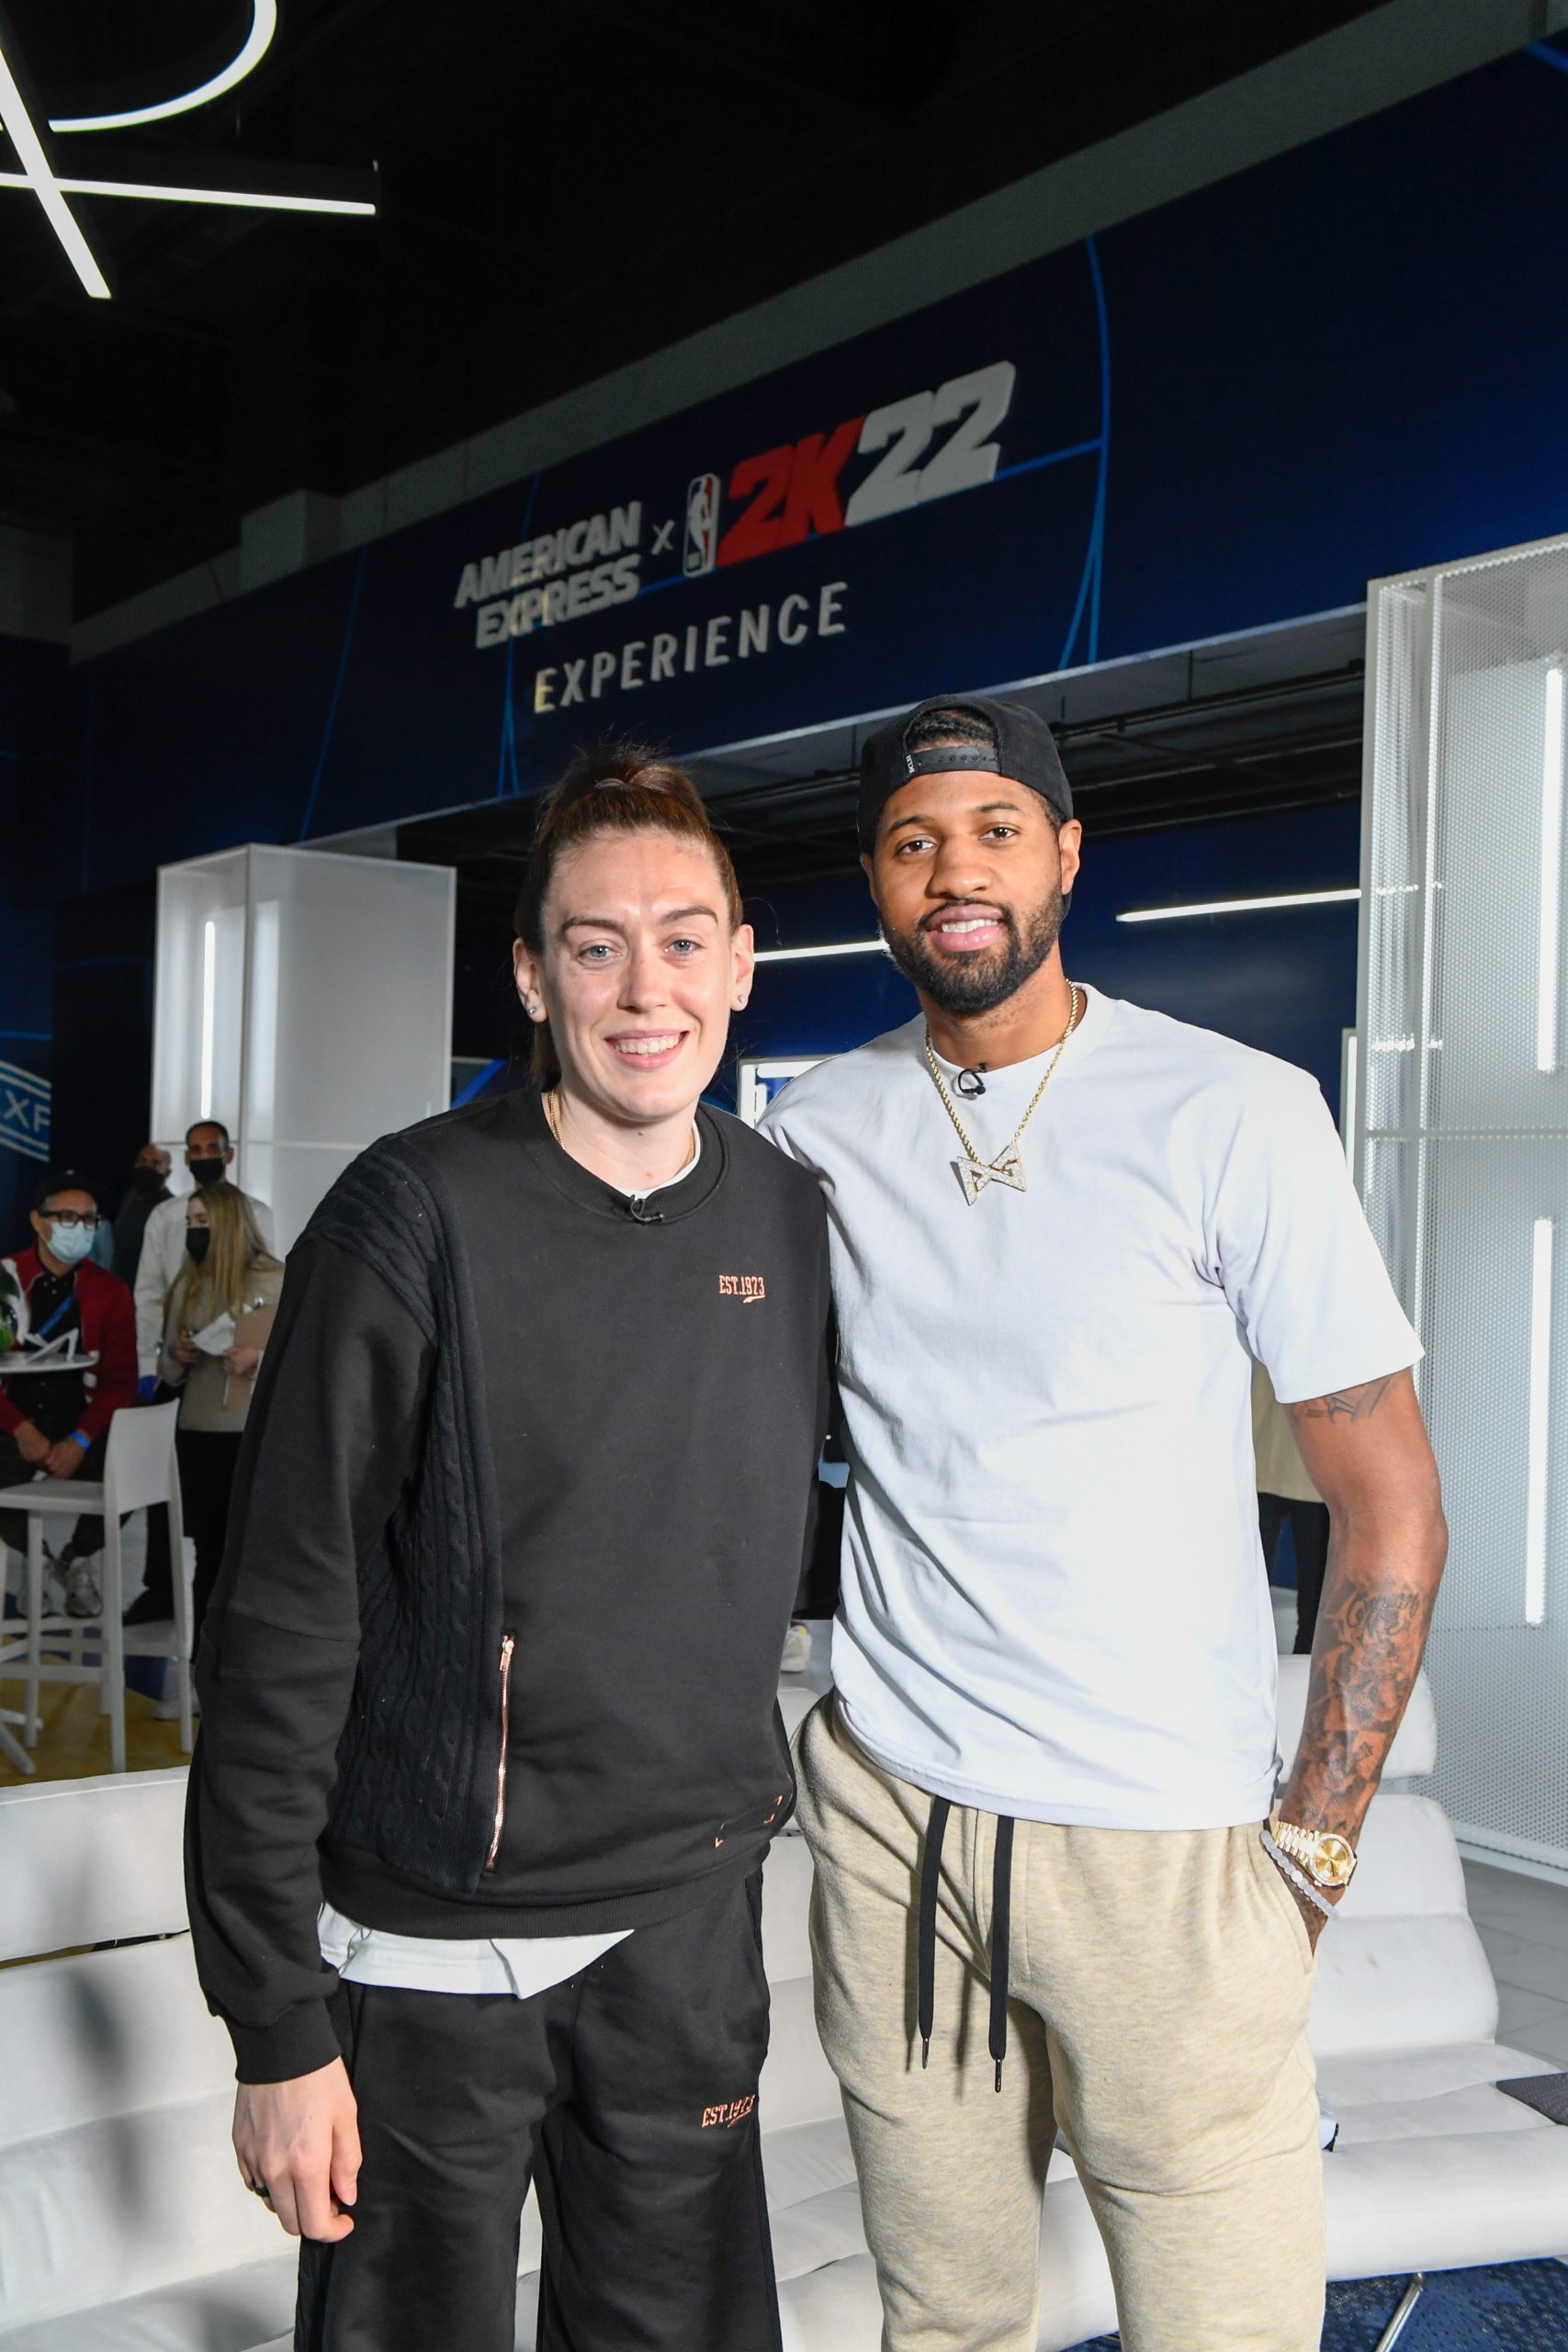 NBA star Paul George, right, and WNBA star Breanna Stewart pose at the American Express x NBA 2K22 experience on Friday, Dec. 10, 2021, in Los Angeles. (Kyusung Gong/American Express via AP Images)